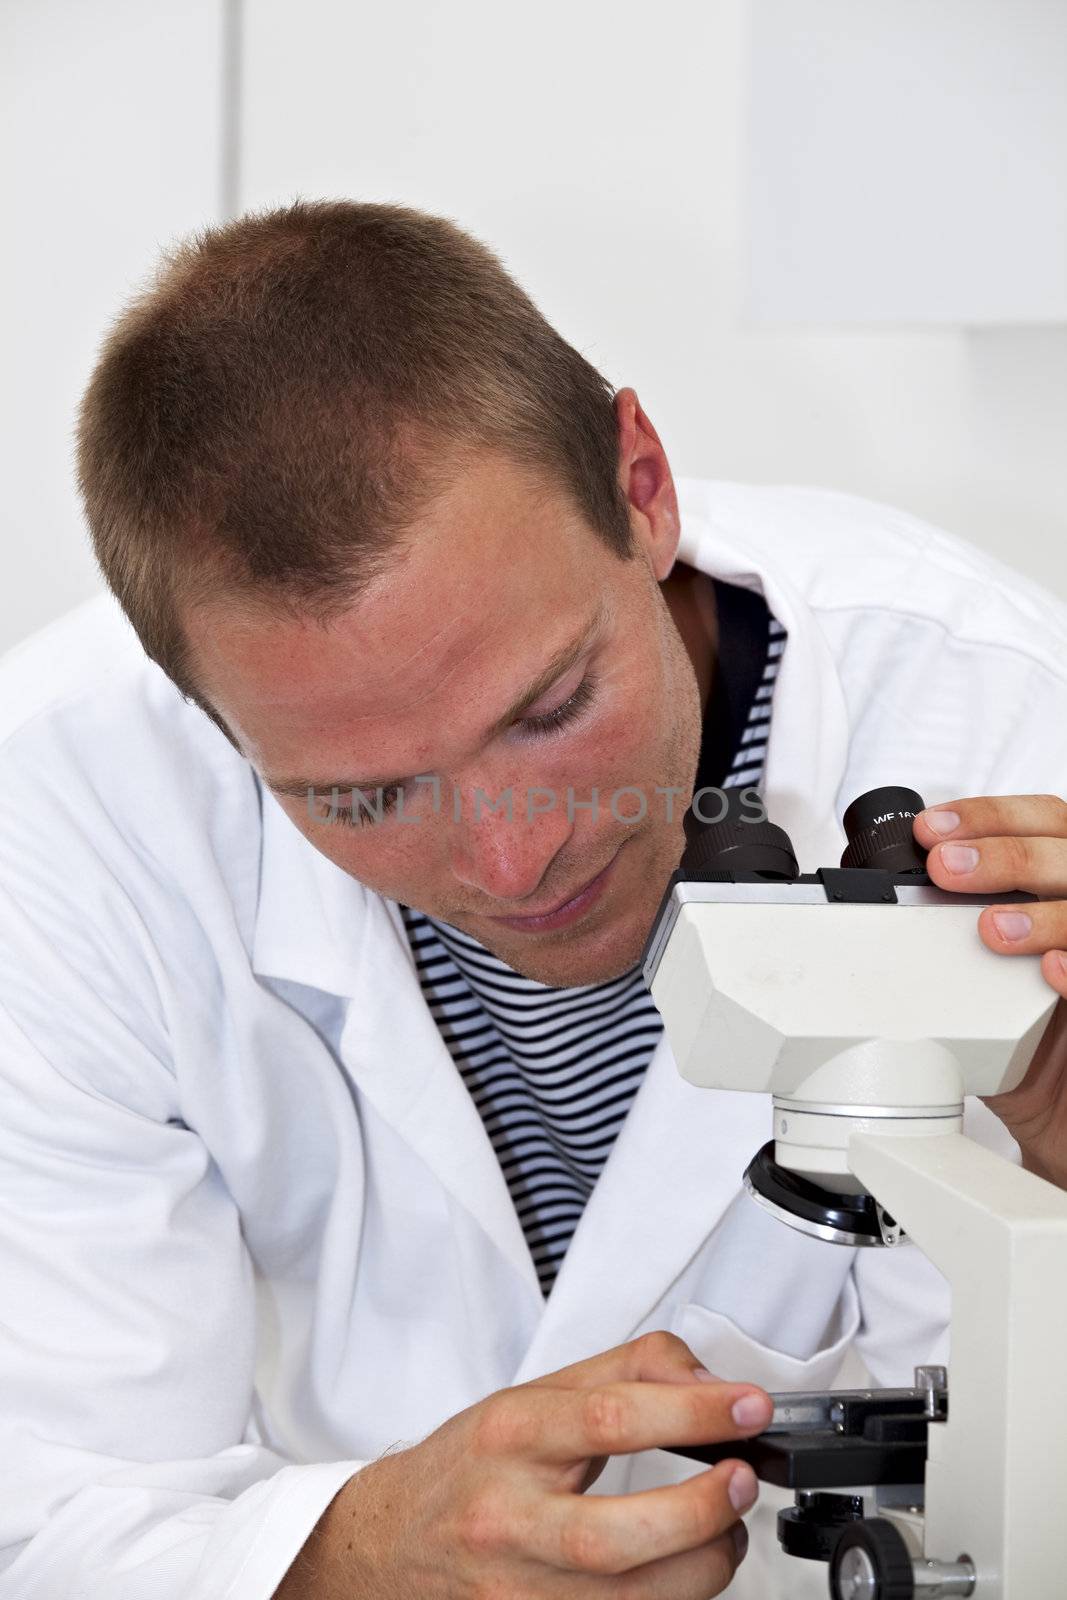 young lab technician fiddling with a microscope